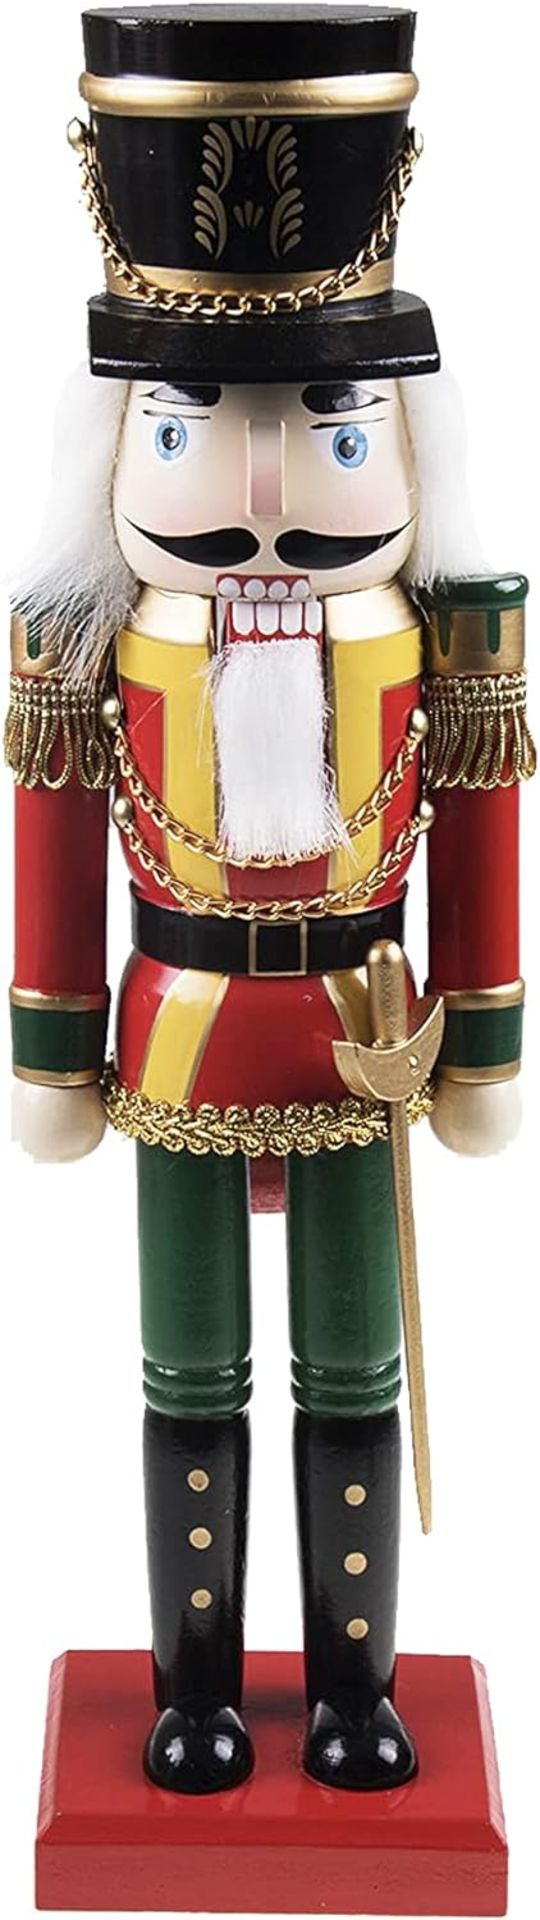 RRP £30.99 Clever Creations Soldier Nutcracker Decoration Figure - 14" Red, Gold, Blue, Black, And